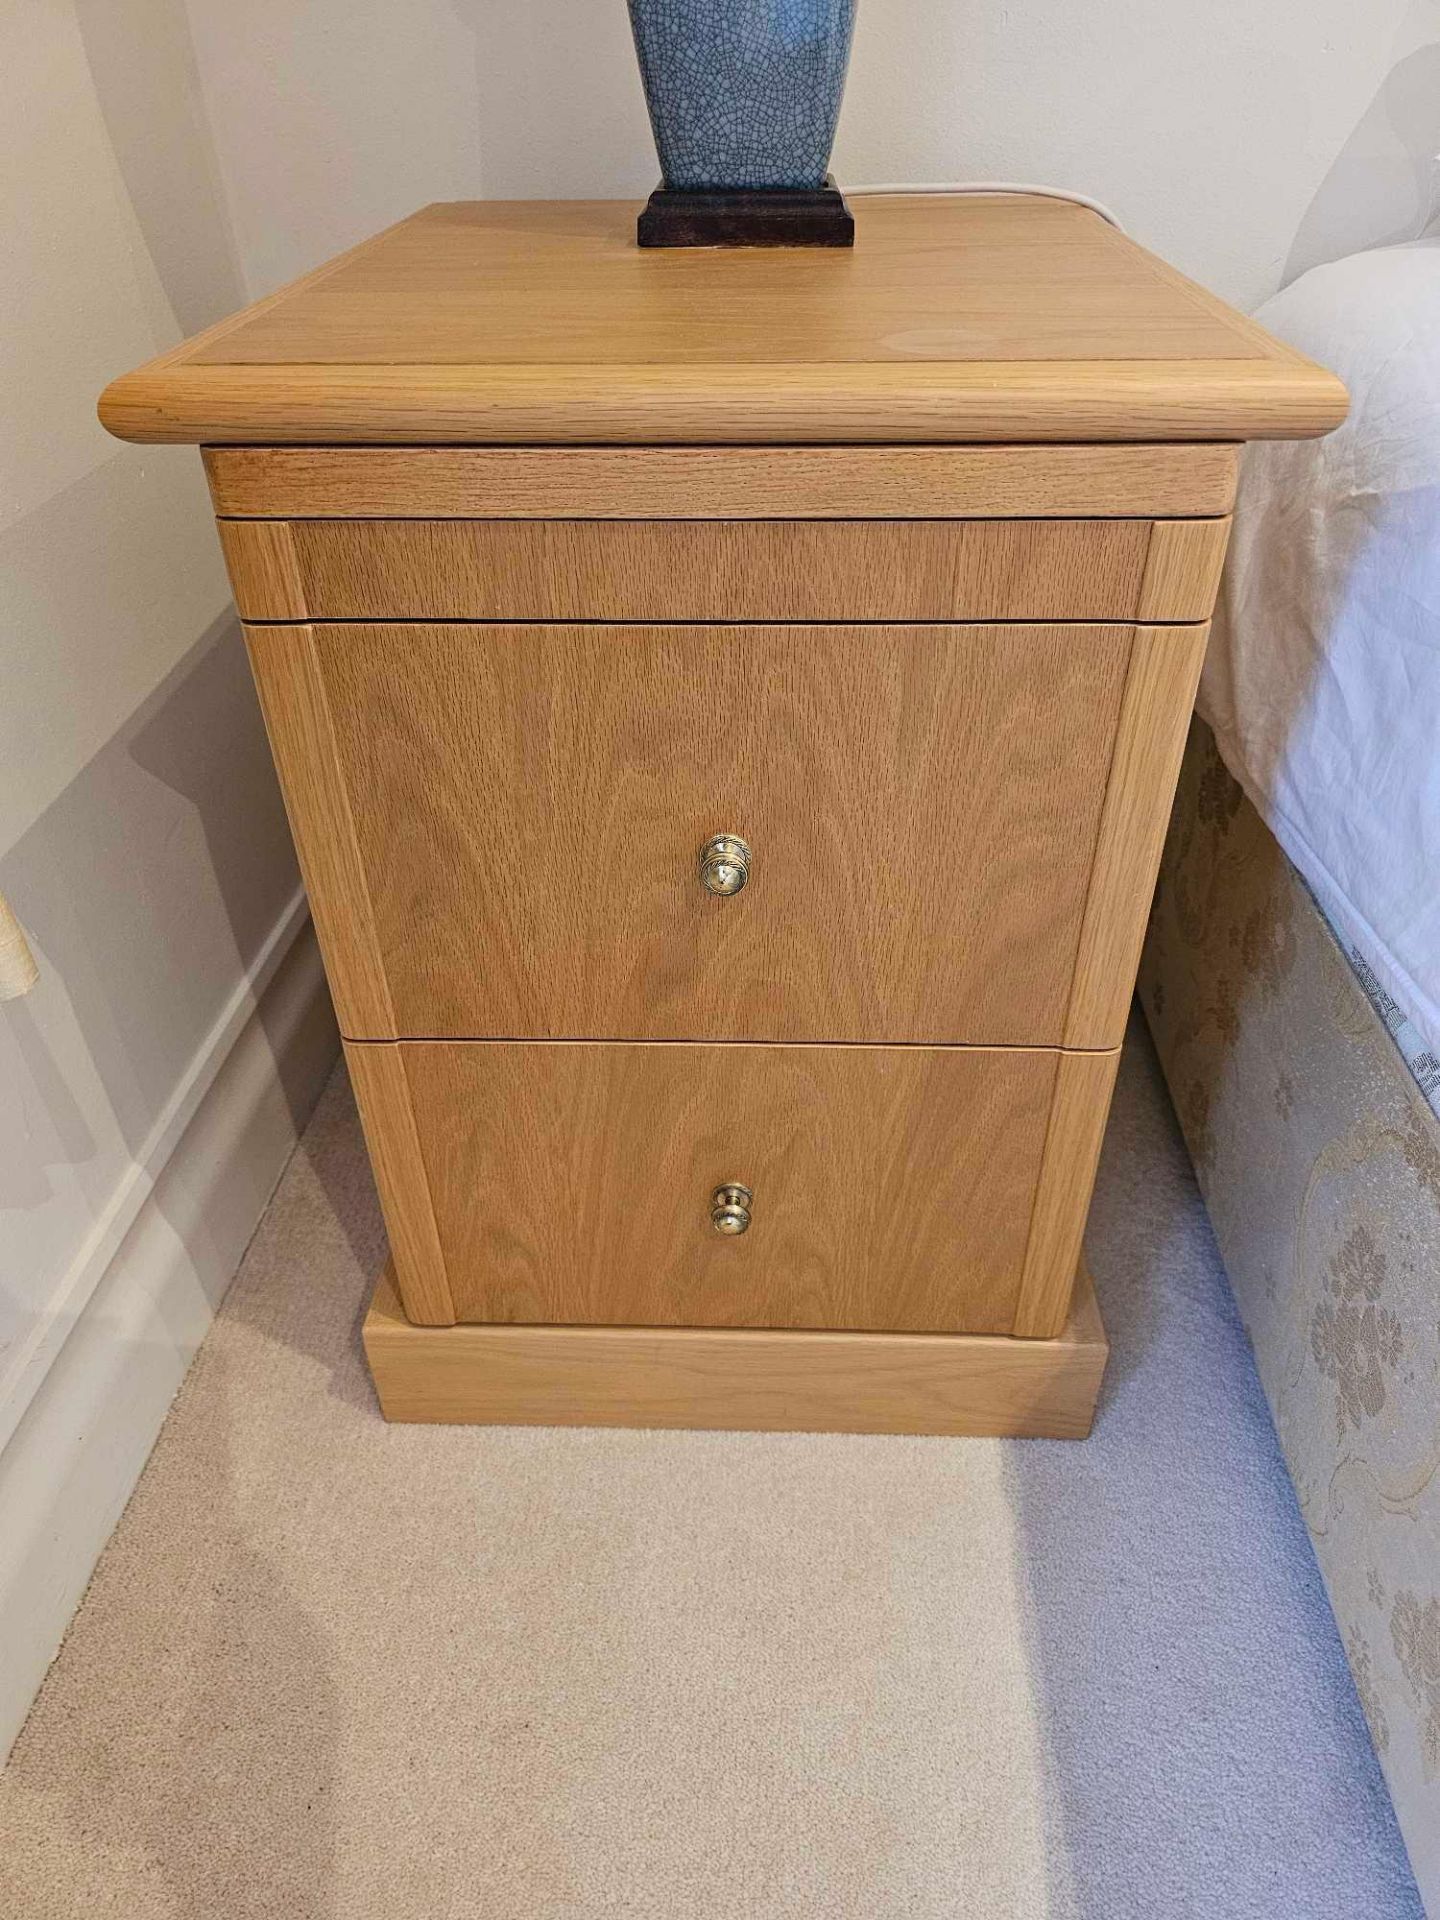 A Pair Of Oak Contemporary Two Drawer Nightstands 46 X 54 X 63cm - Image 2 of 4